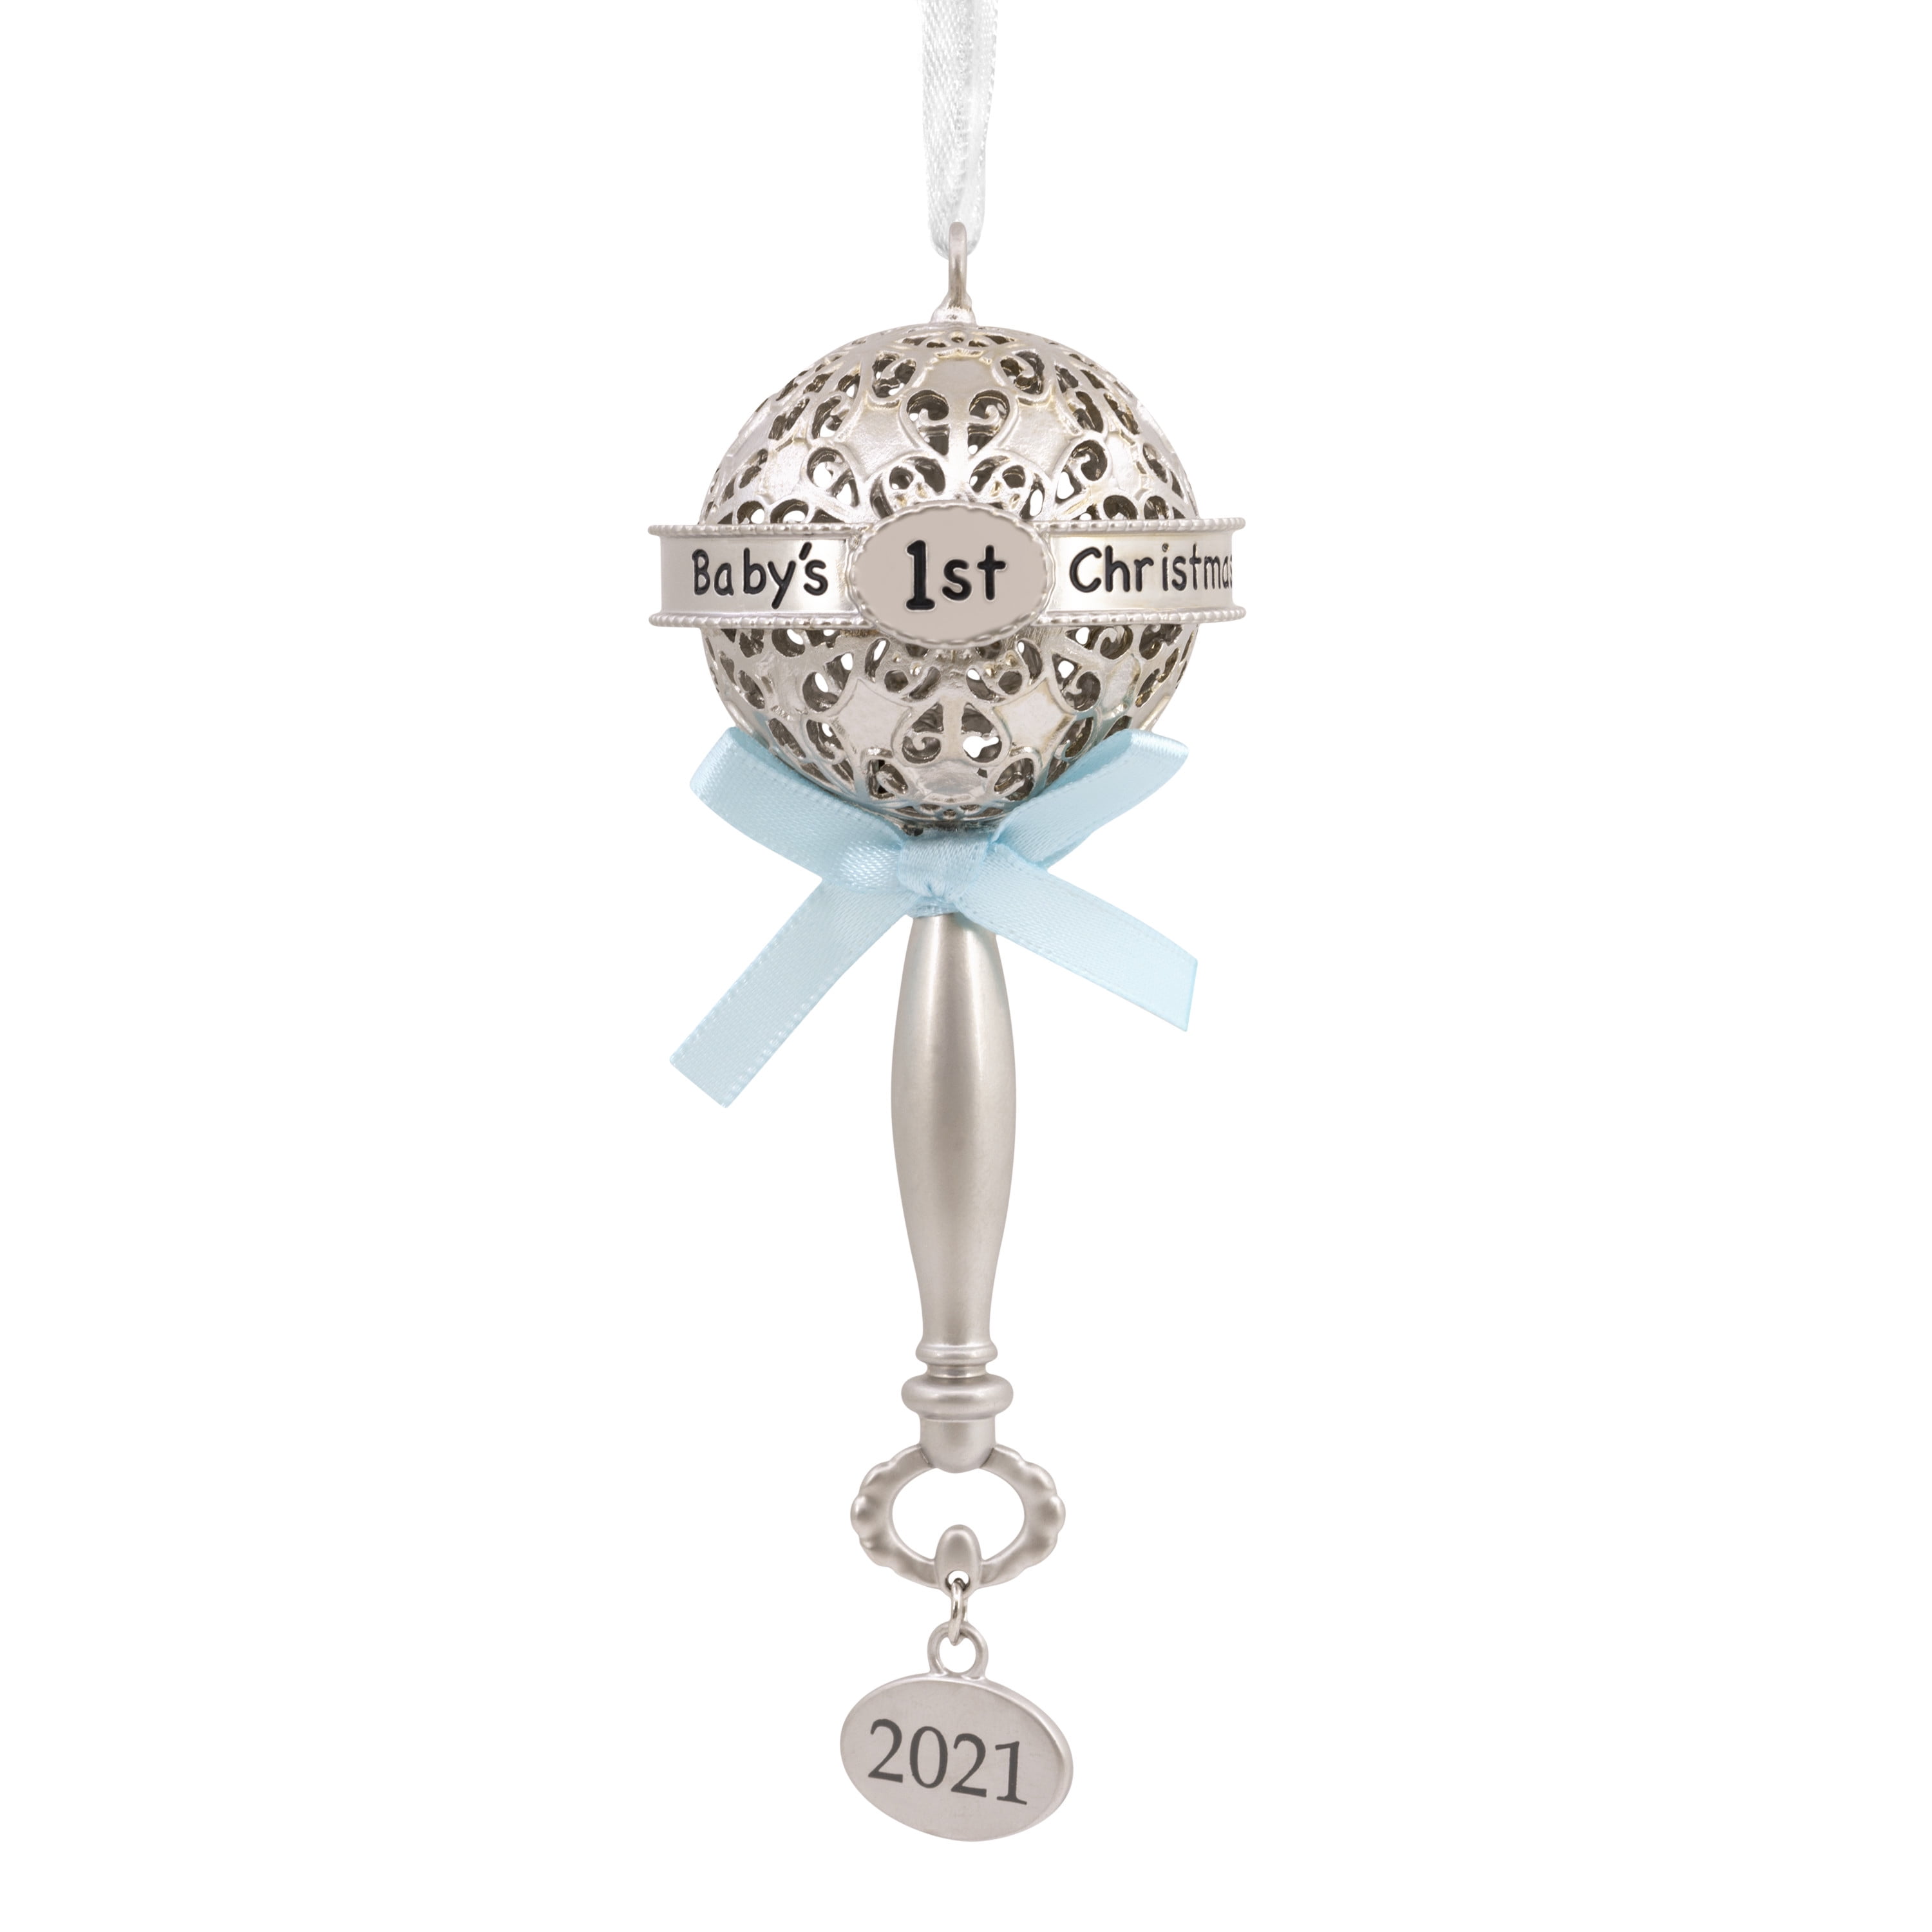 Hallmark Premium Baby's First Christmas Silver Baby Rattle with Blue Ribbon 2021 Metal Ornament with Satin Gift Bag 